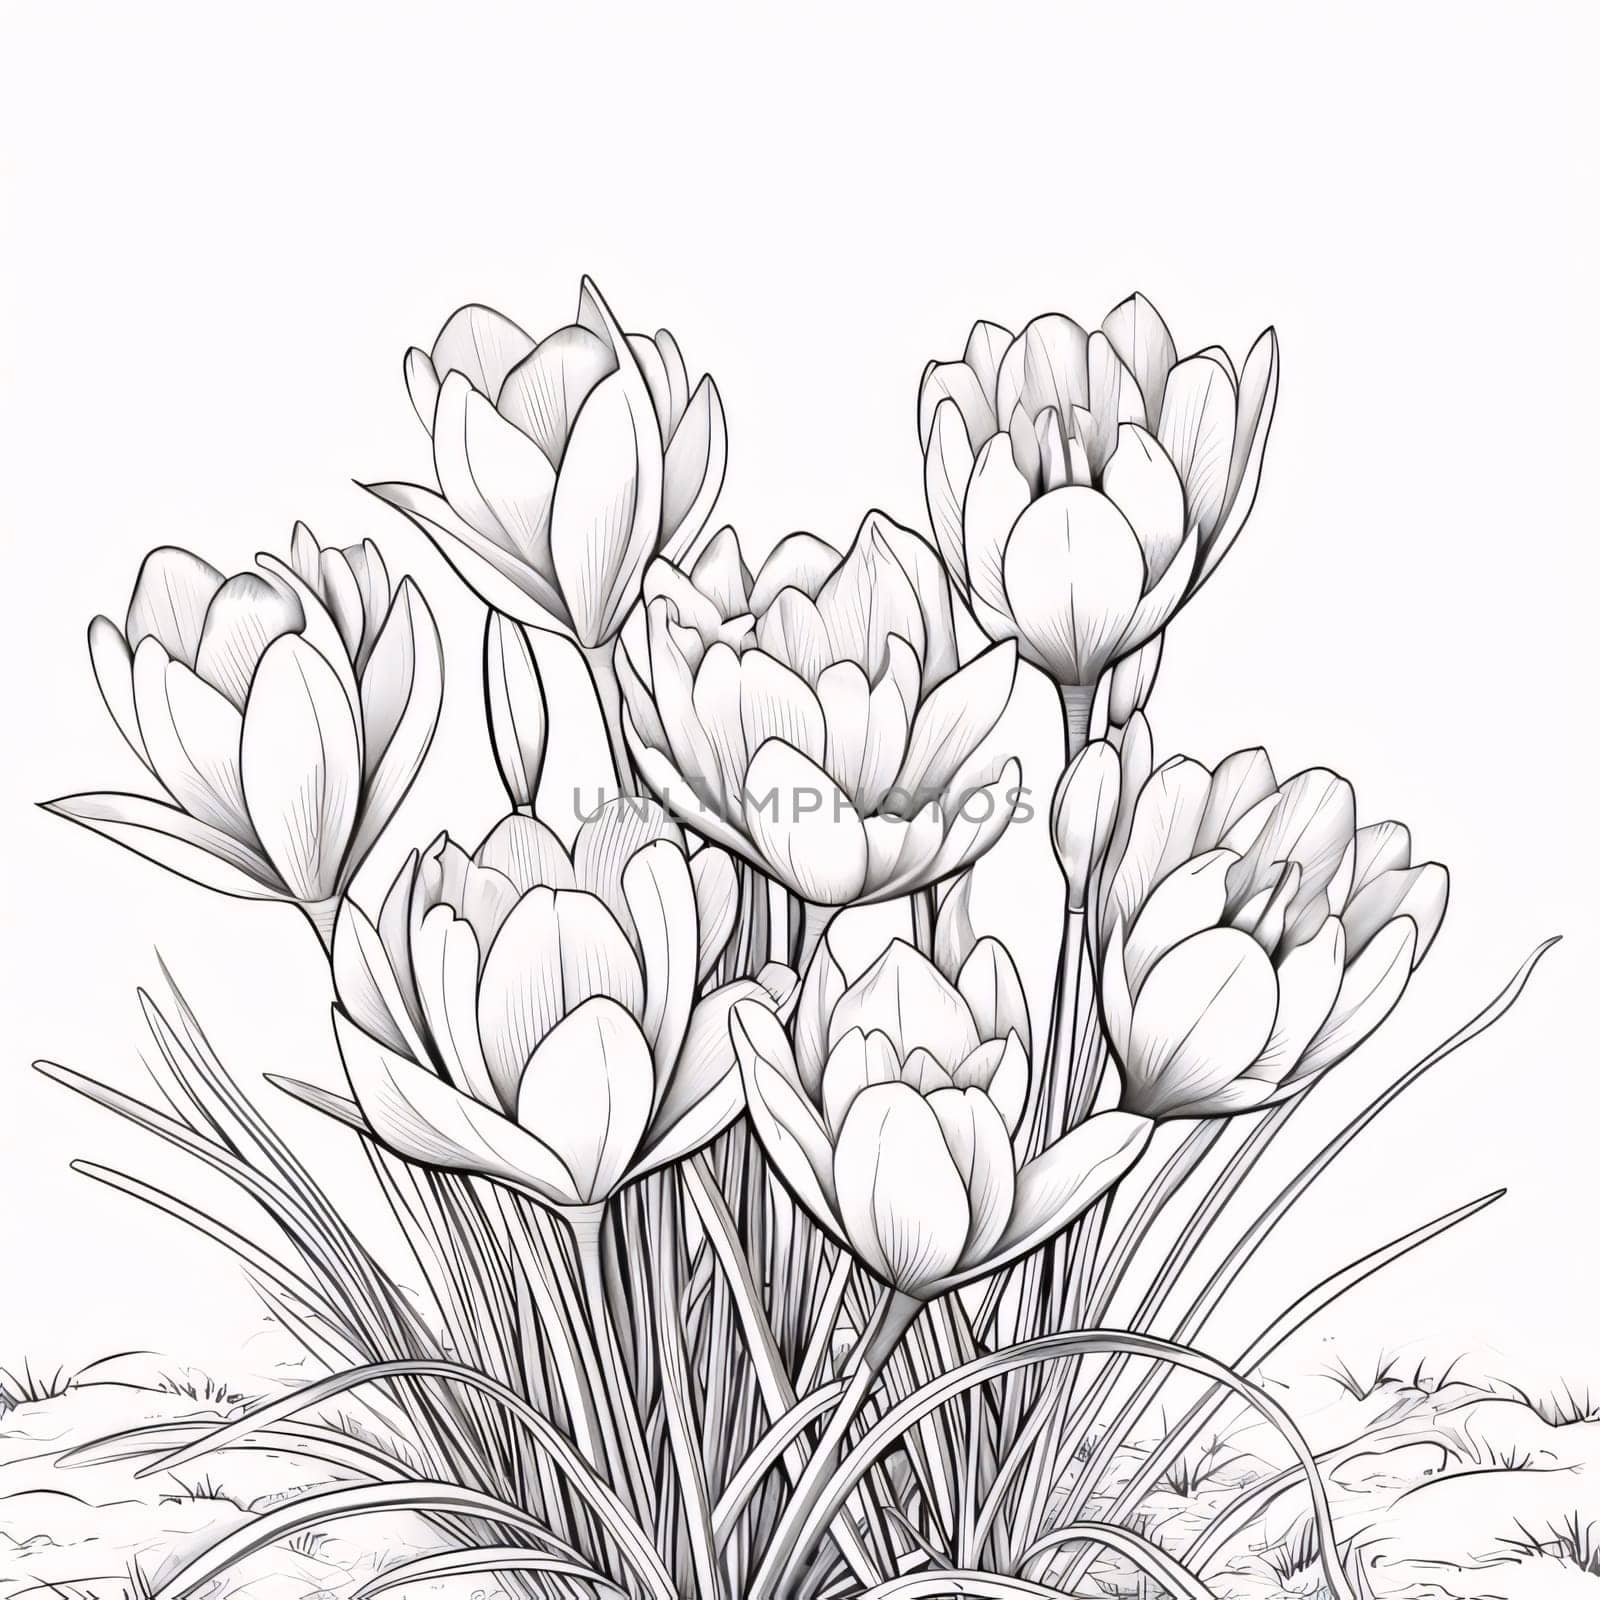 Black and white coloring sheet, a bouquet of flowers. Flowering flowers, a symbol of spring, new life. by ThemesS